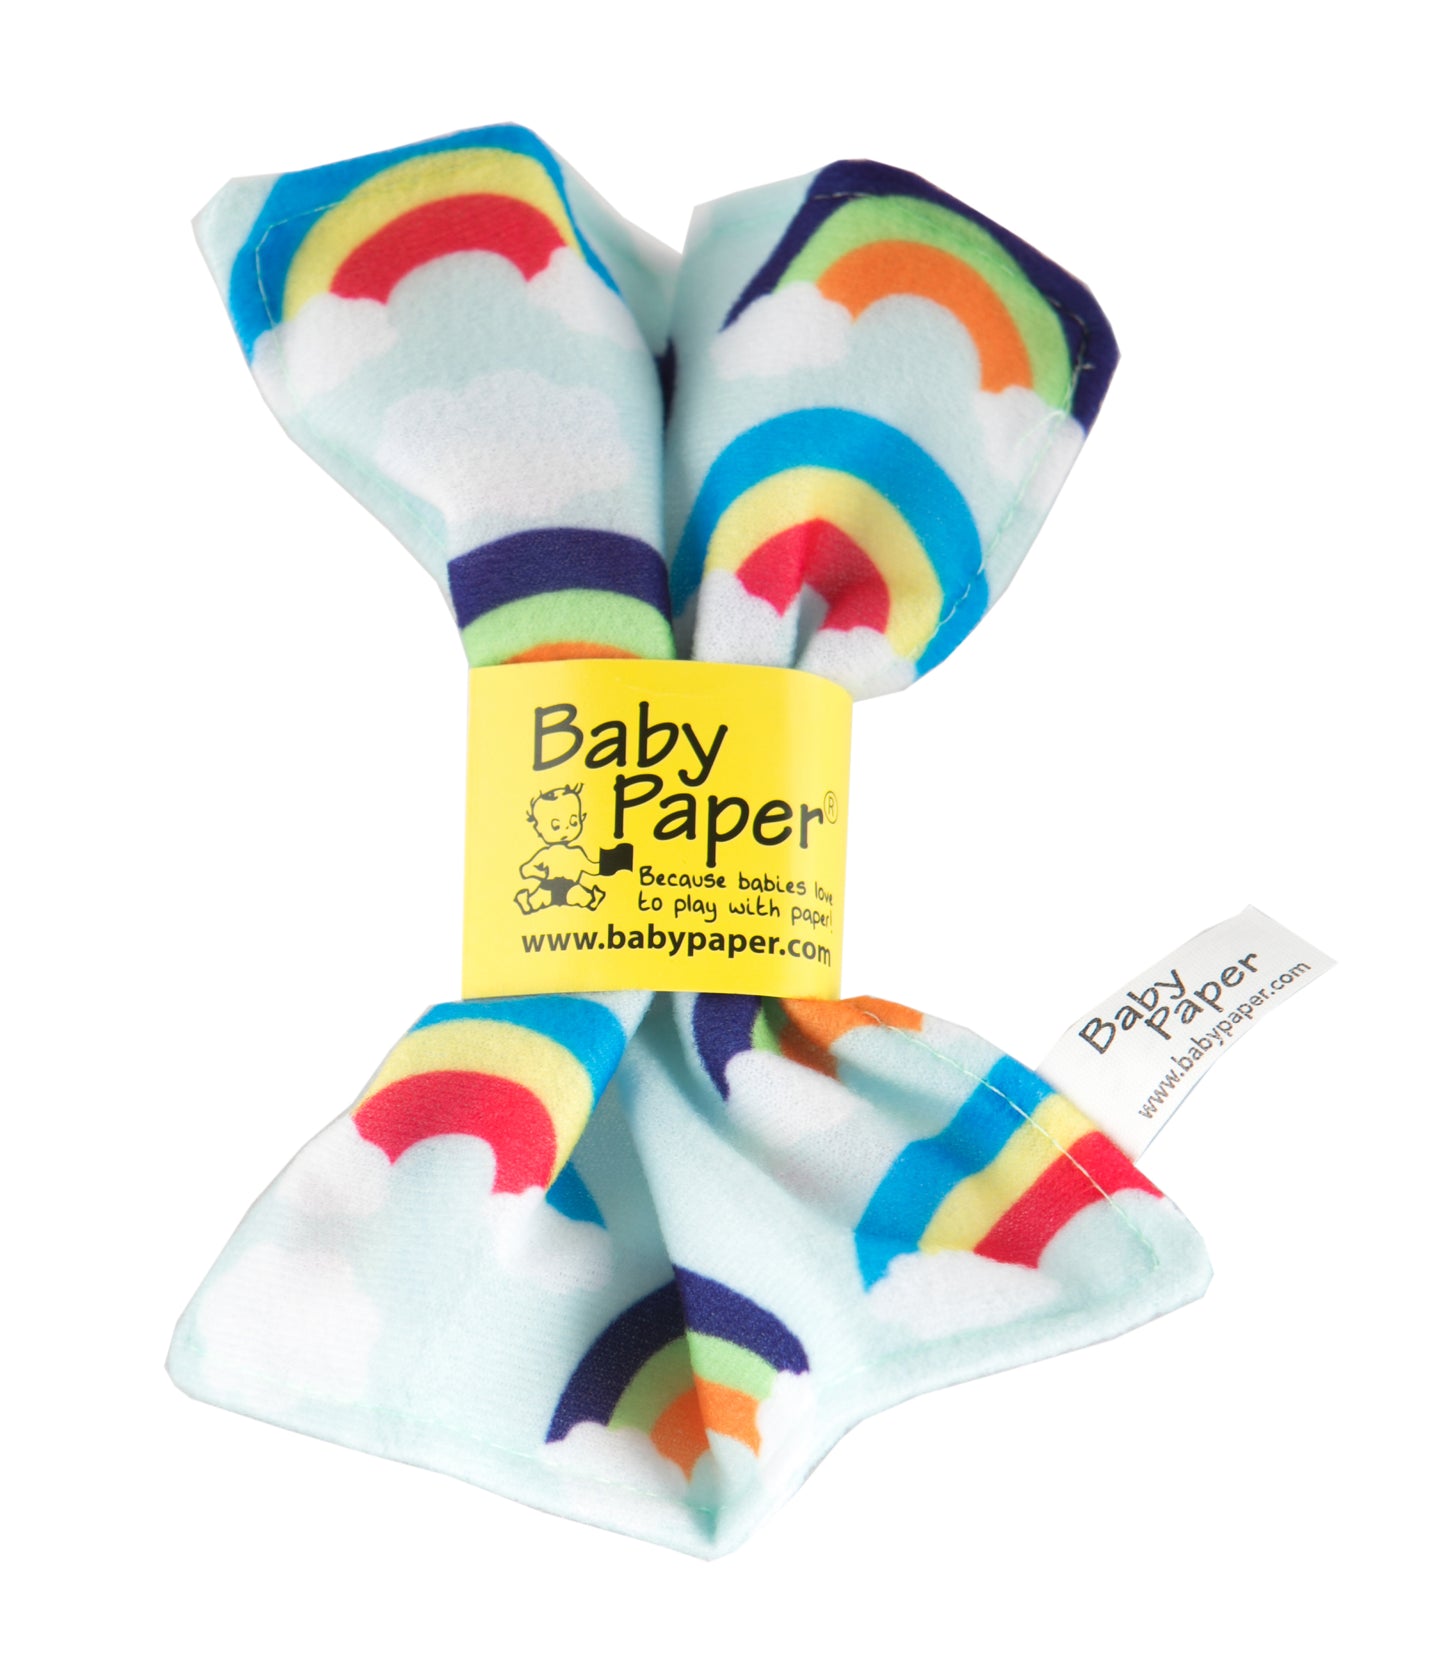 Butterfly Book, Plush & Rainbow Baby Paper Gift Set